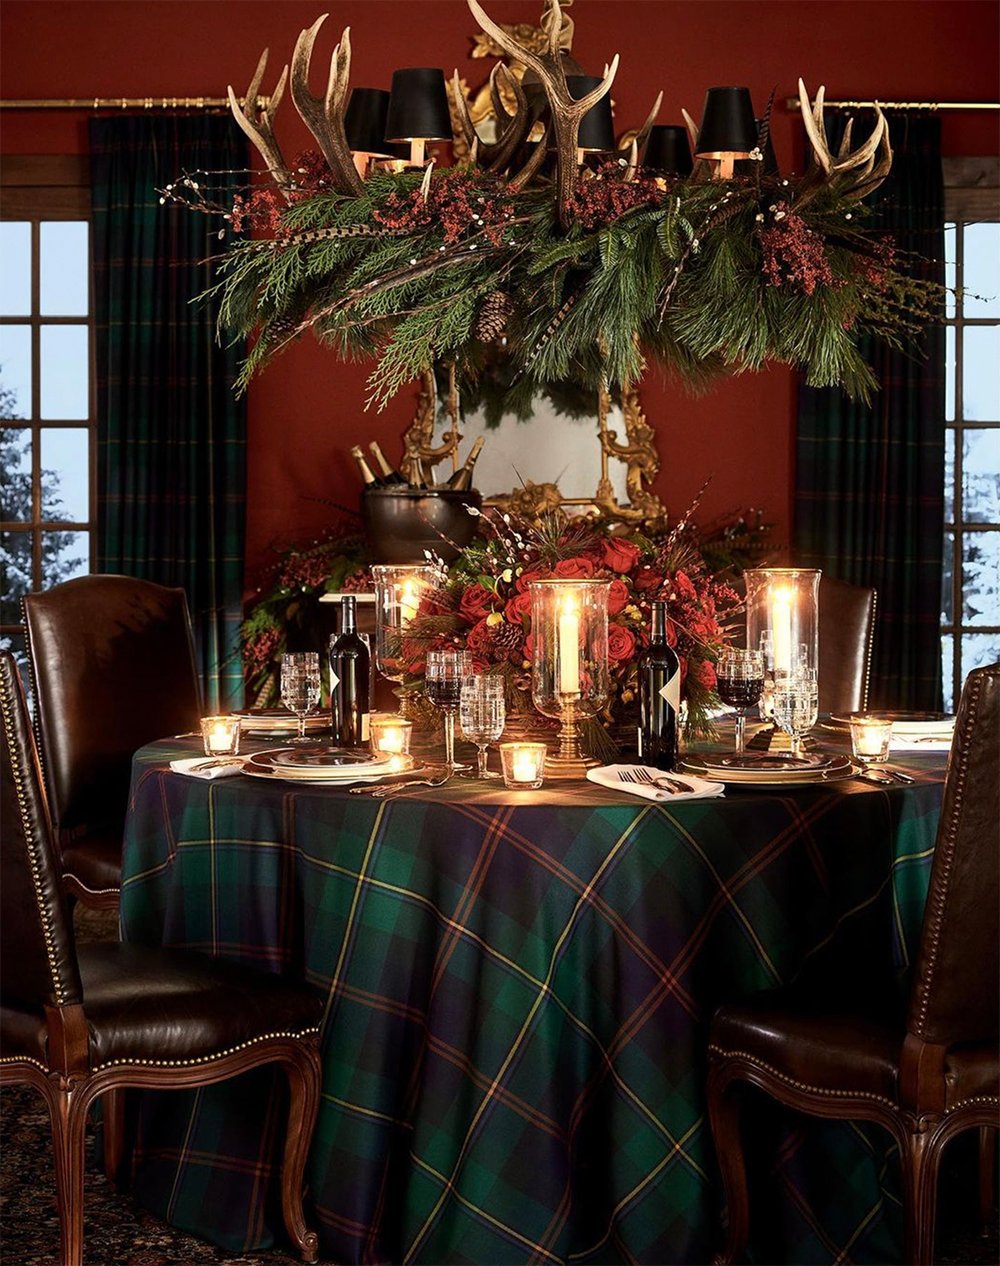 10 Holiday & Winter Vignettes to Admire - roomfortuesday.com